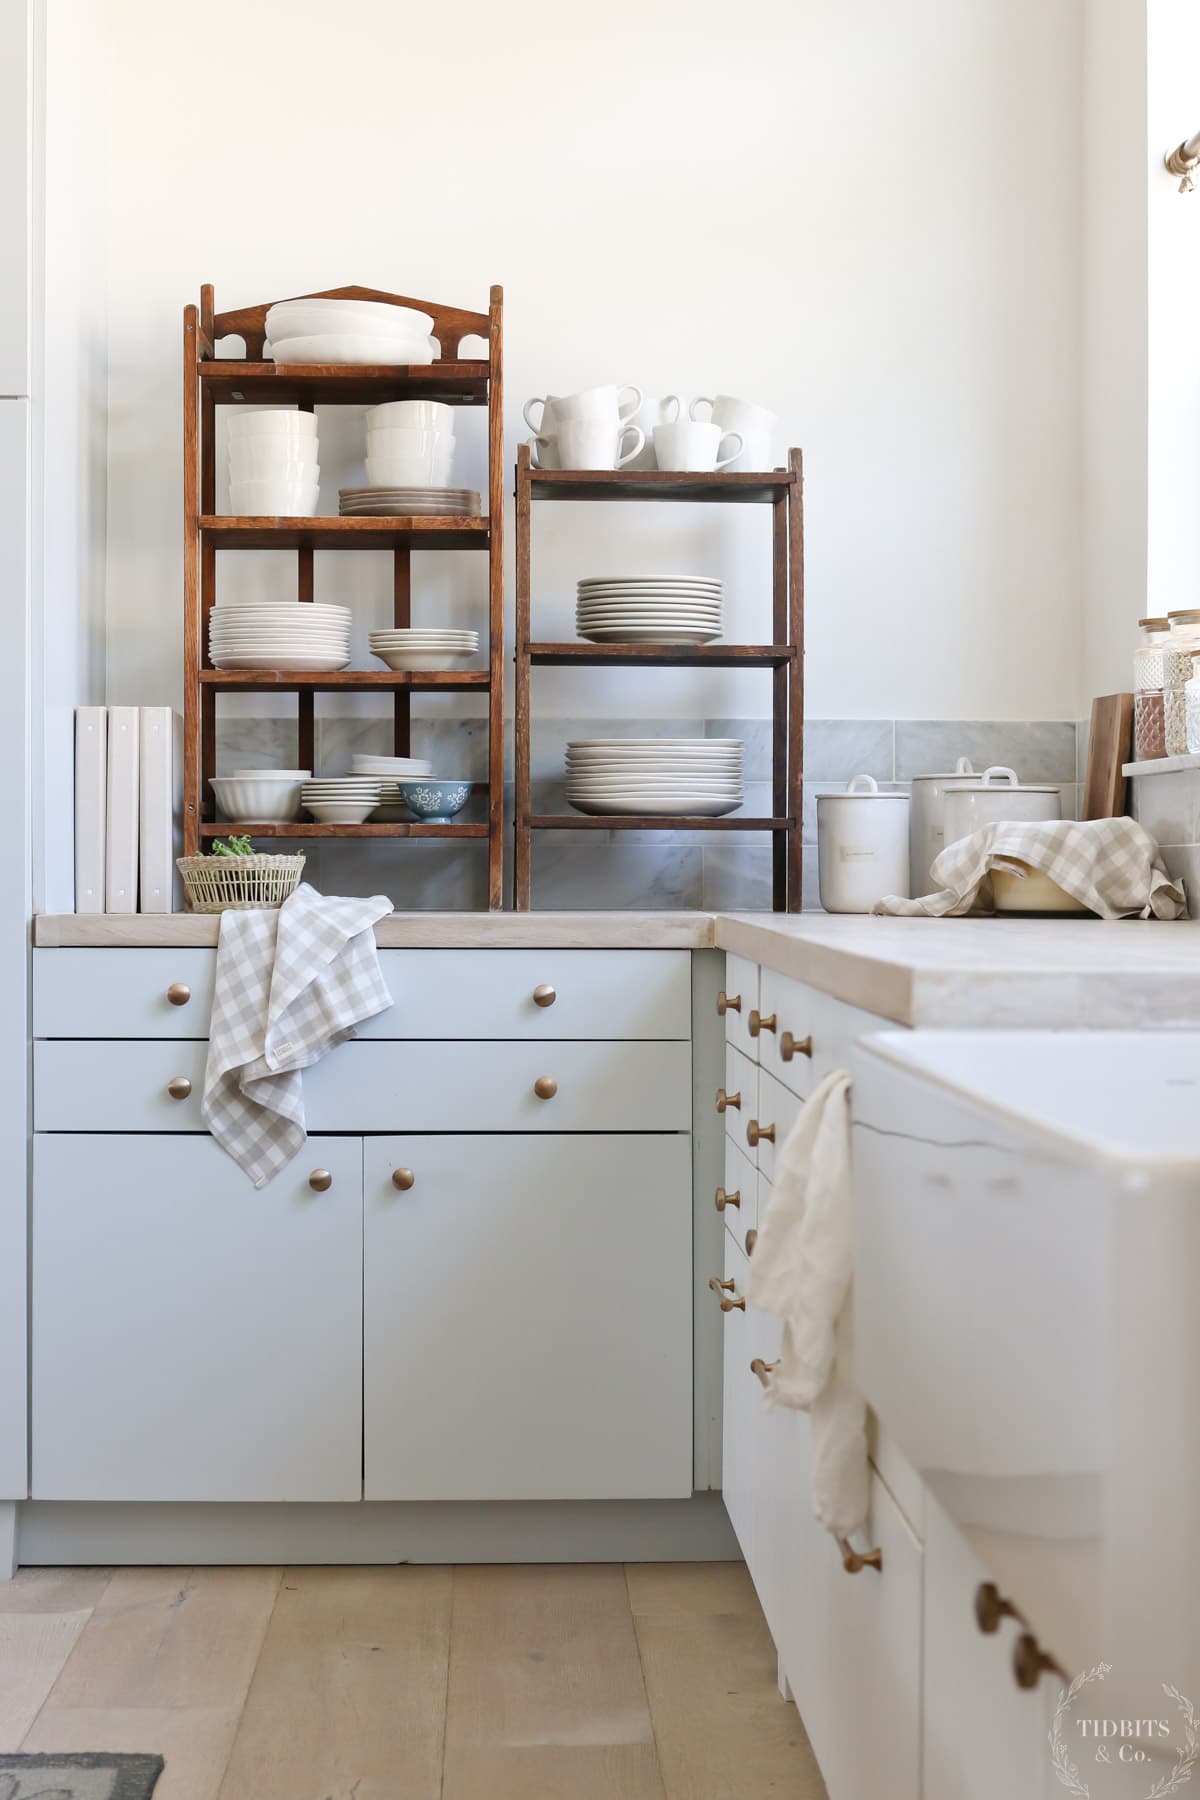 Wooden shelves with white dishes sit on a kitchen counter